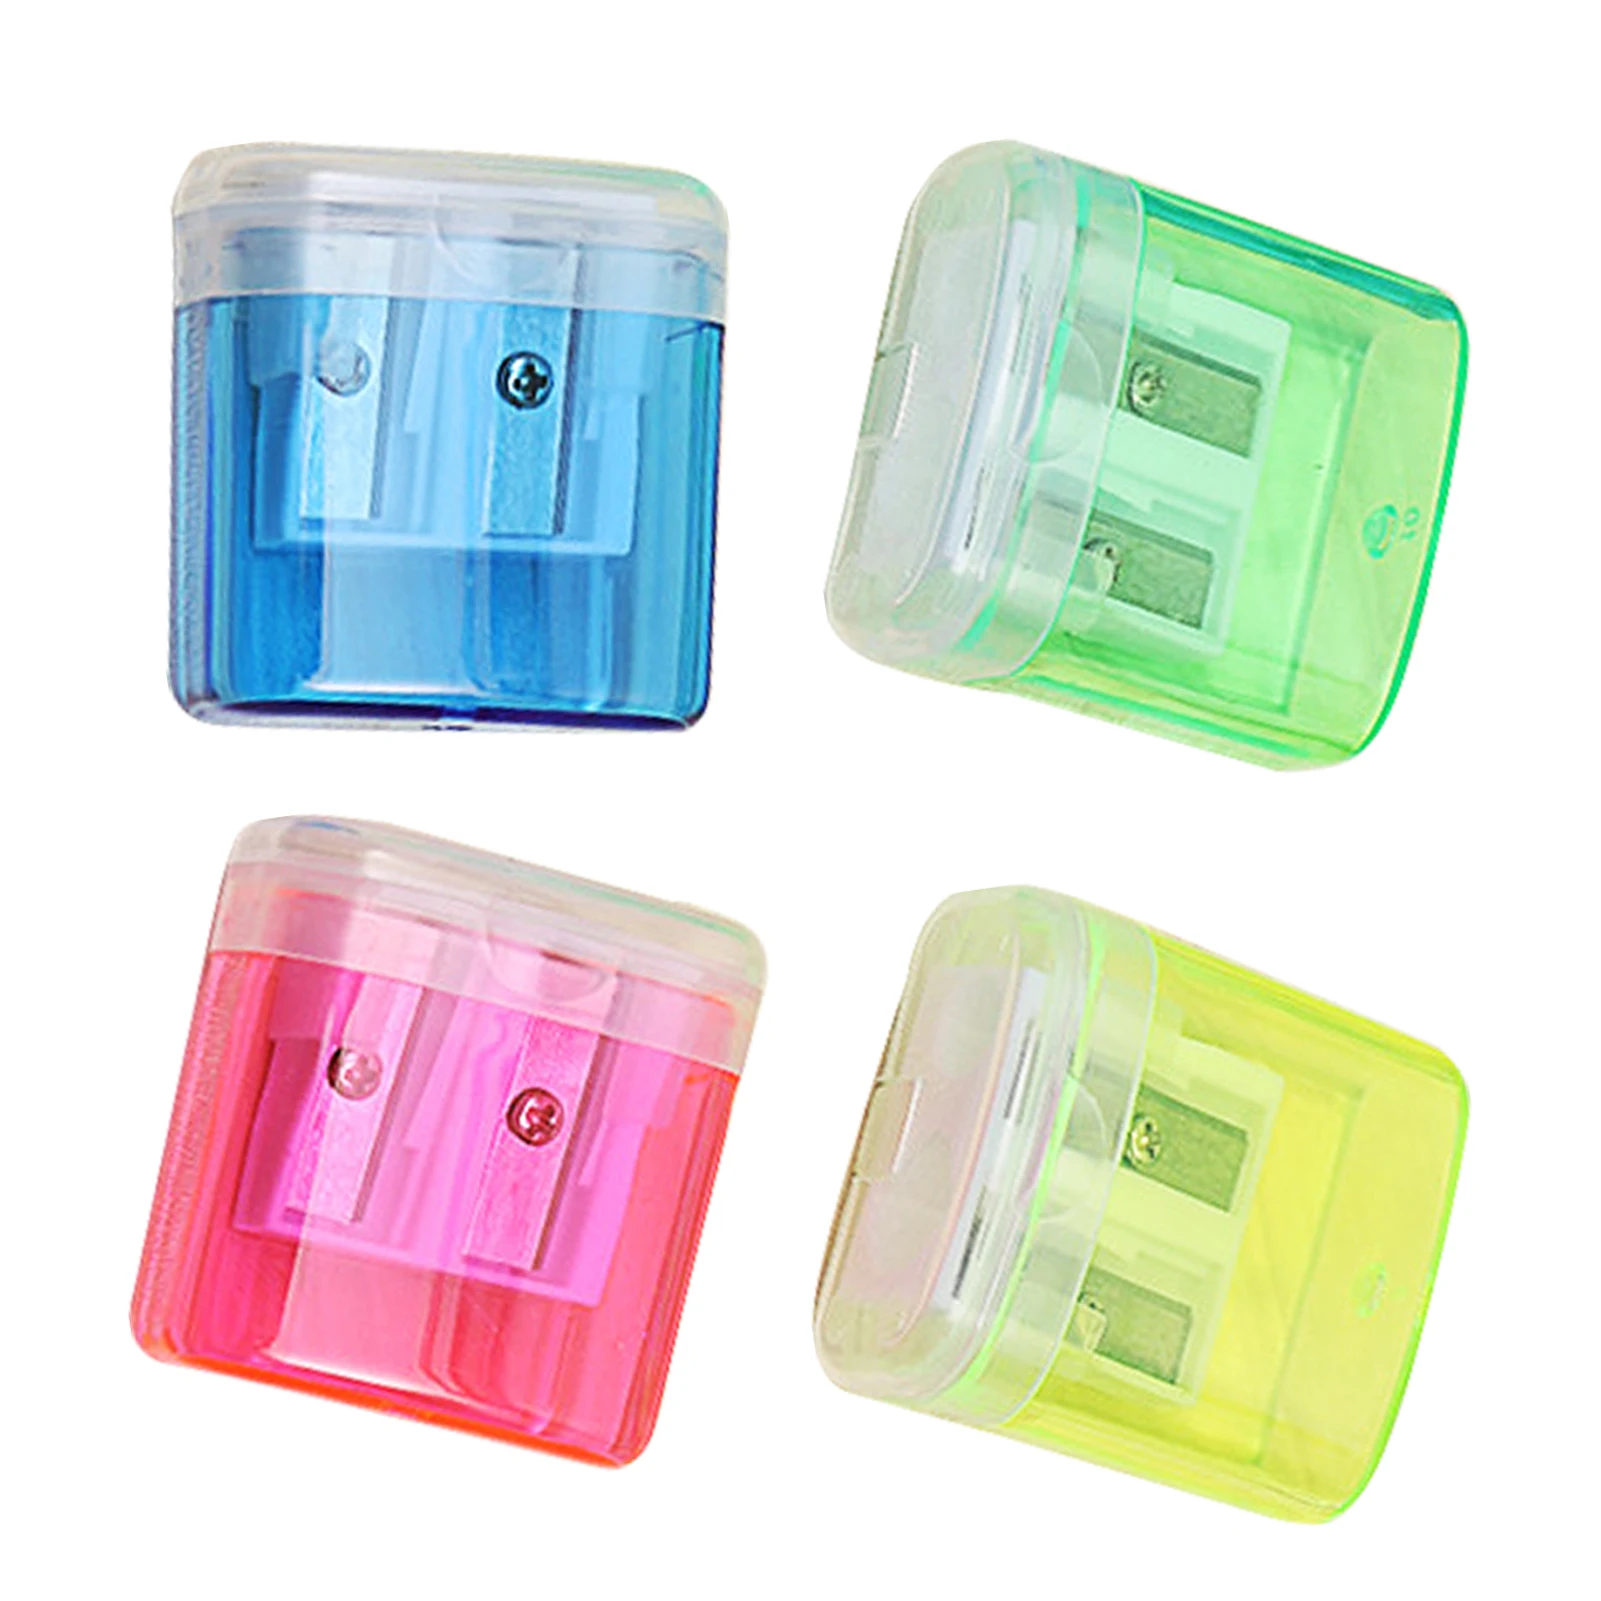 

4pcs Students Double Hole Efficient Schools Classroom Pencil Sharpener Portable Manual Durable Easy Use With Container Colourful